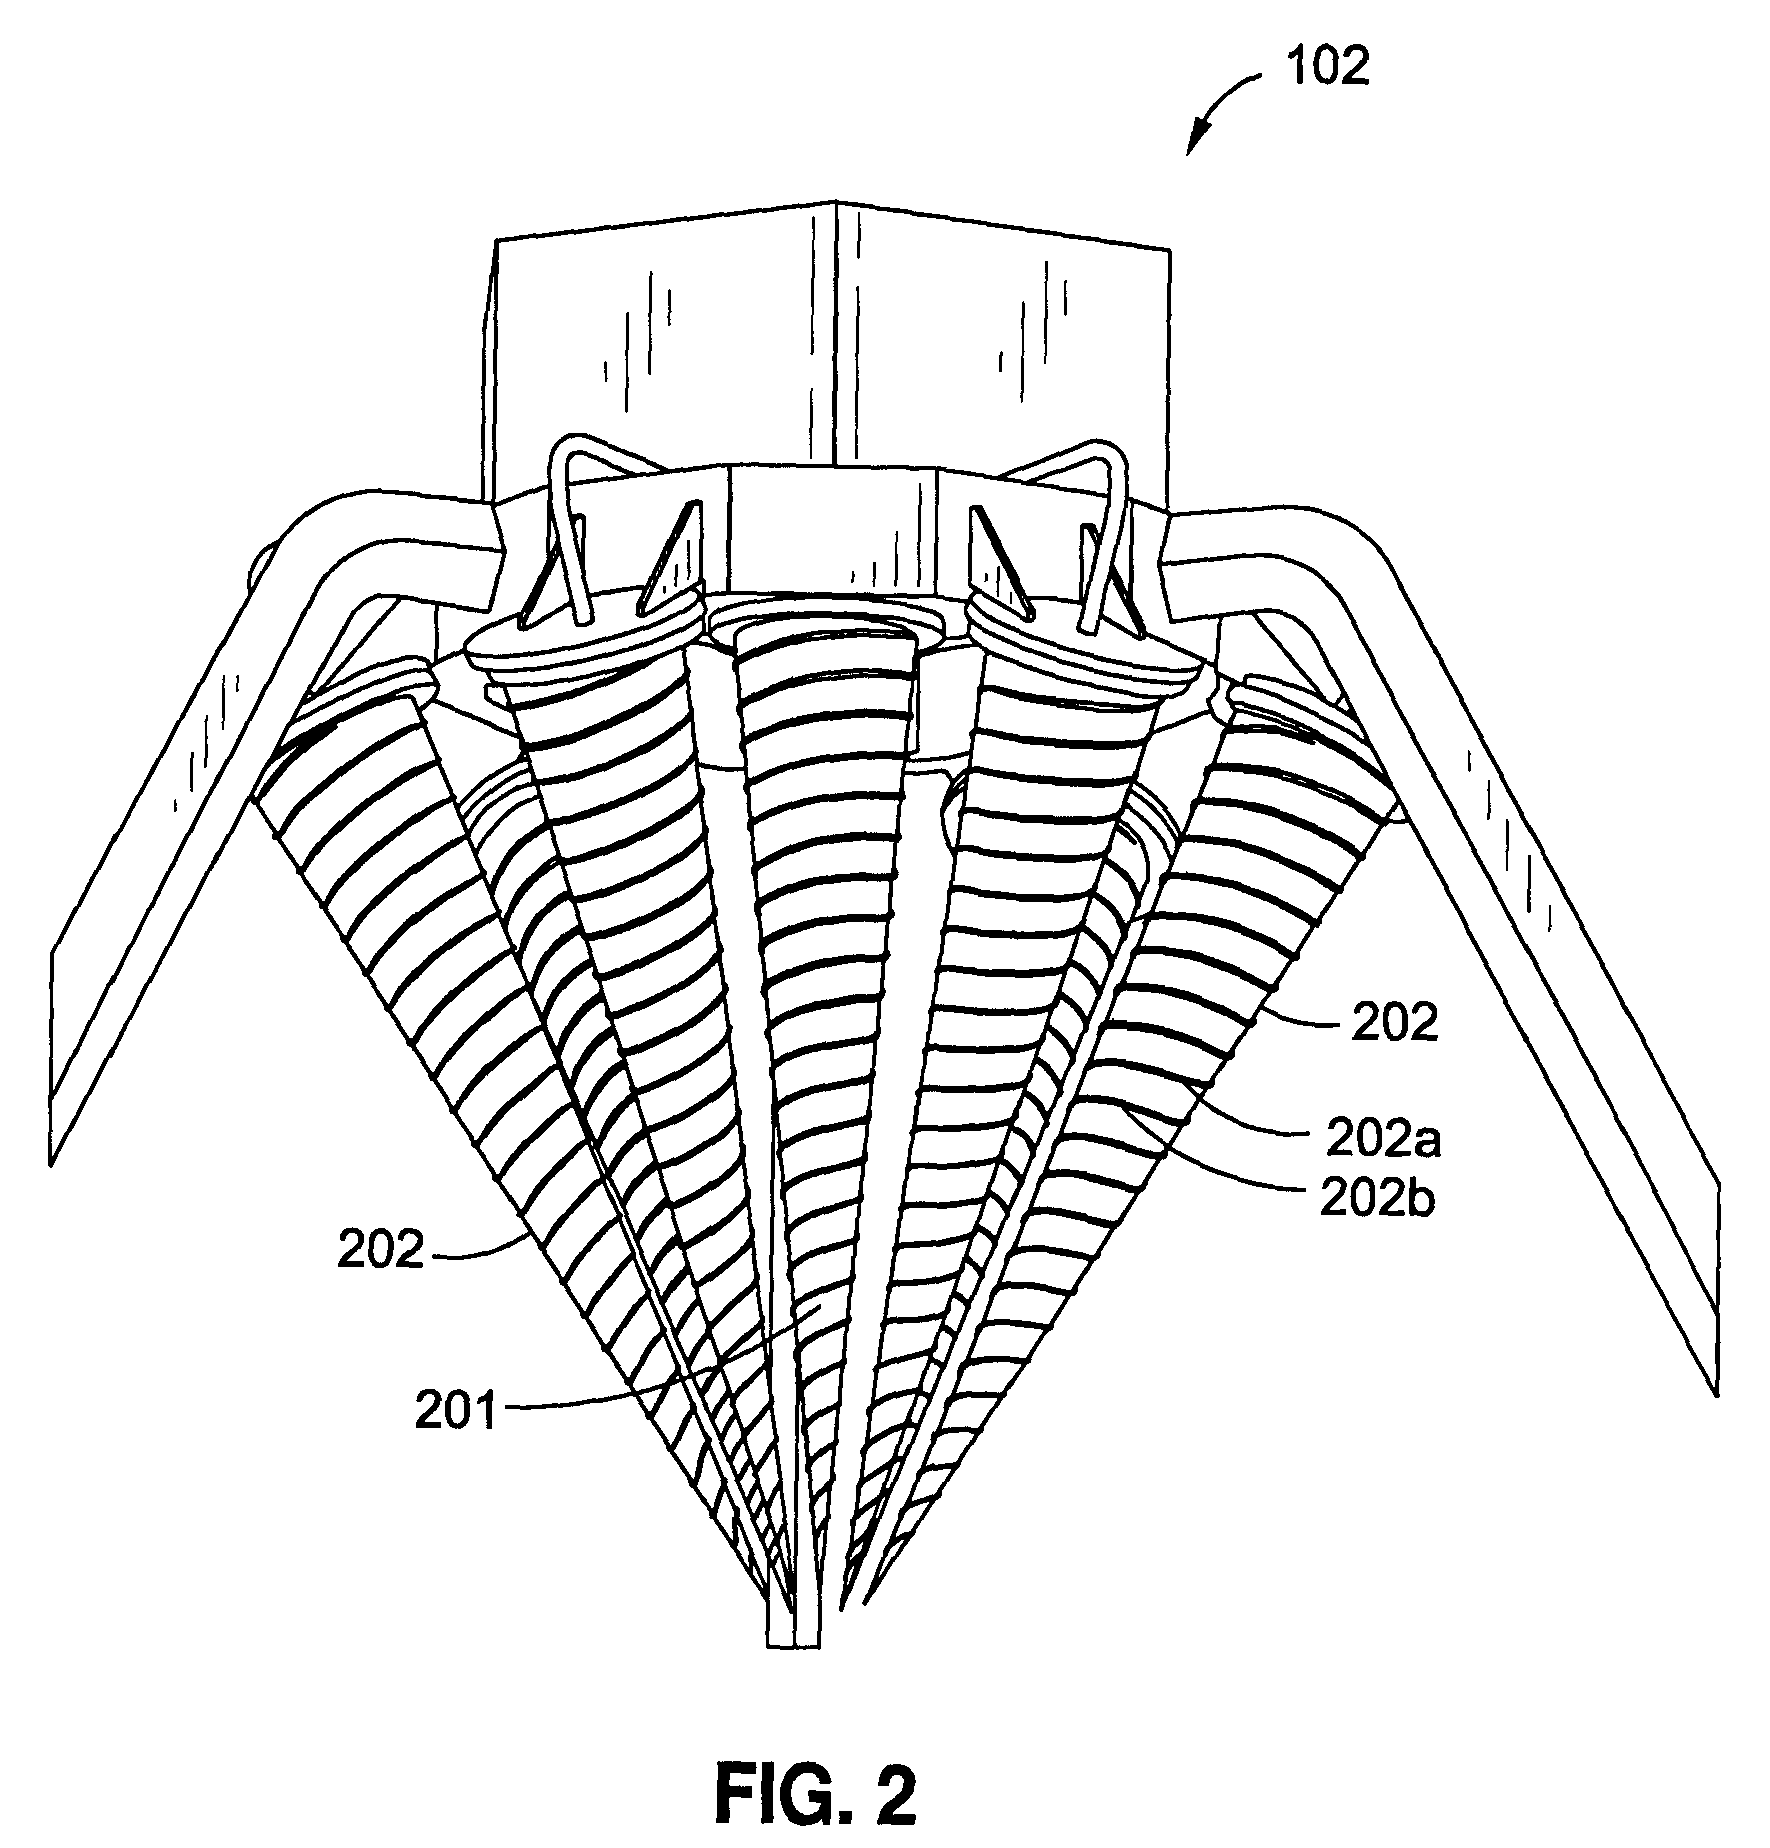 Versatile wideband phased array FED reflector antenna system and method for varying antenna system beamwidth